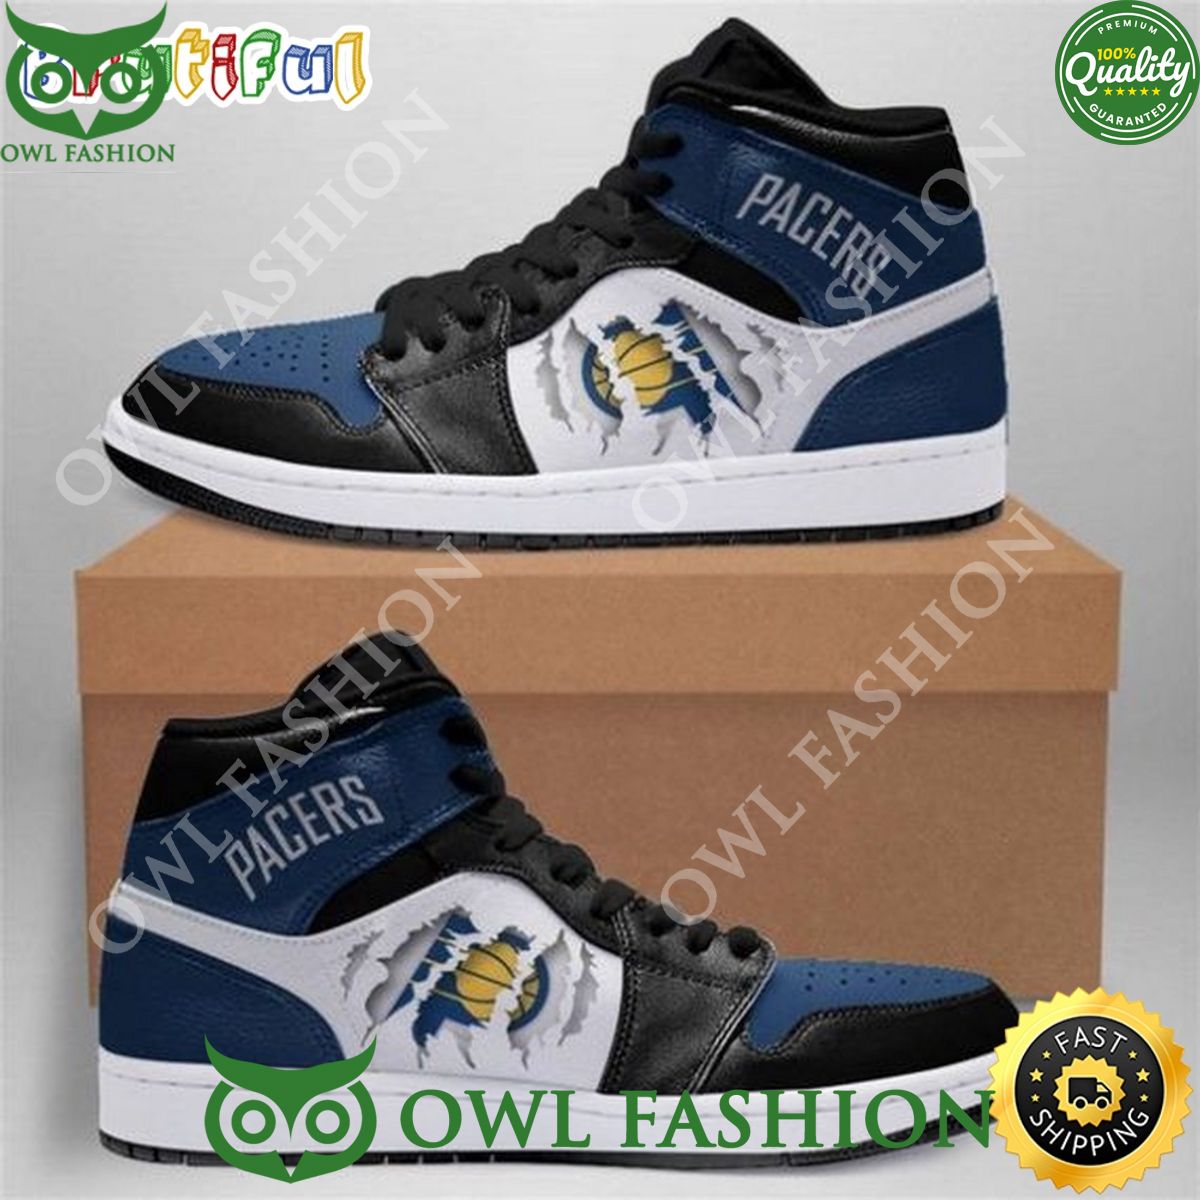 Indiana Pacers NBA Championship Blue White Scratch Air Jordan 1 High Shoes